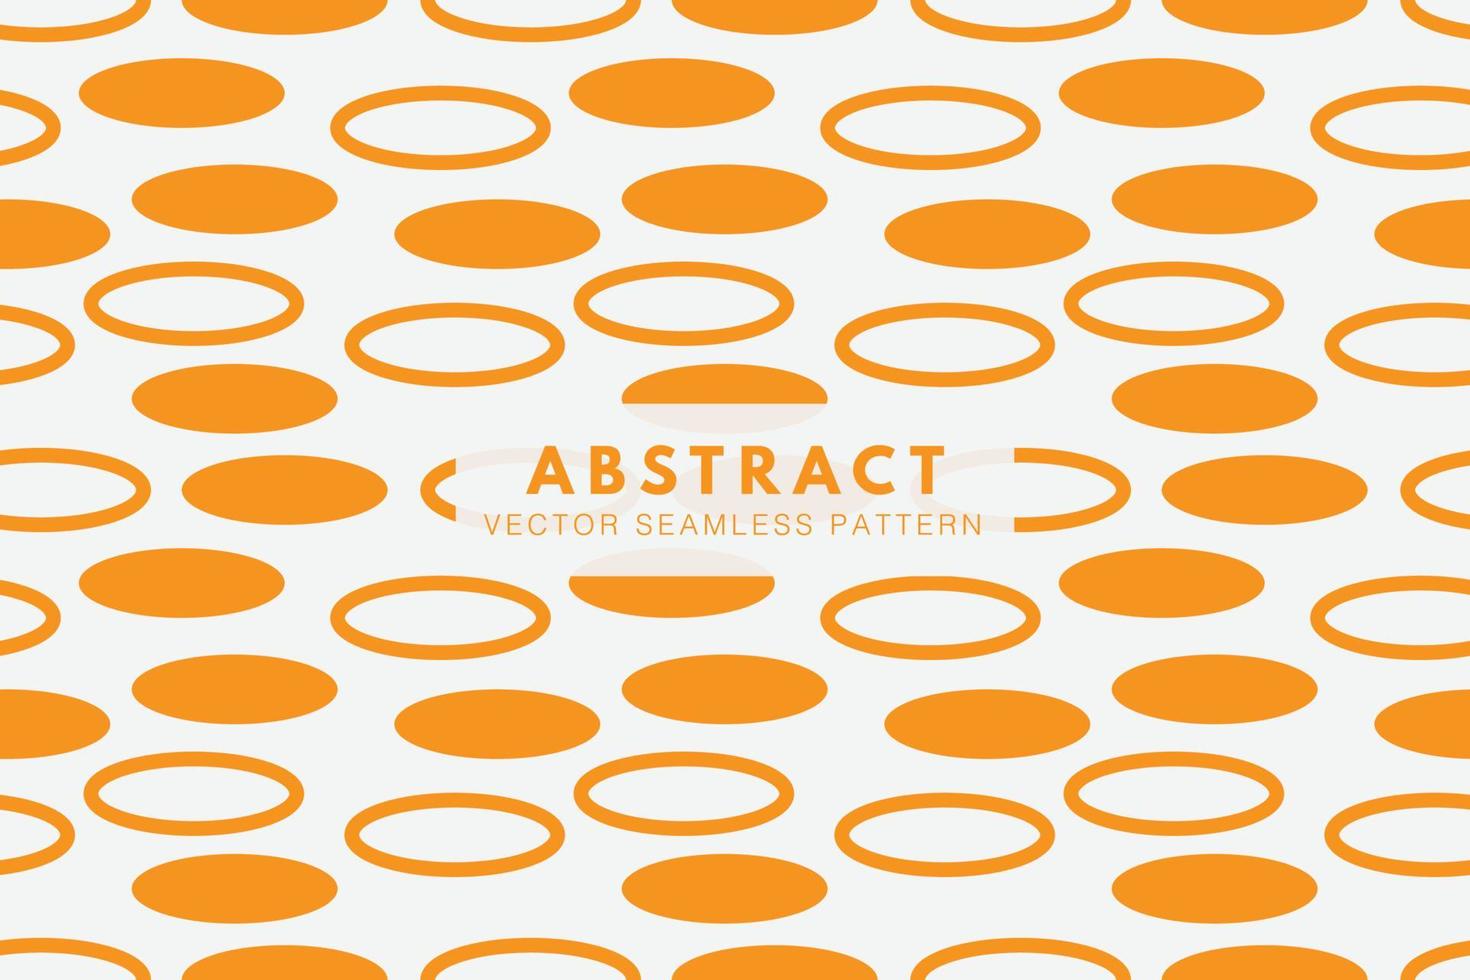 Oblong ellipse shapes abstract vector repeating seamless pattern